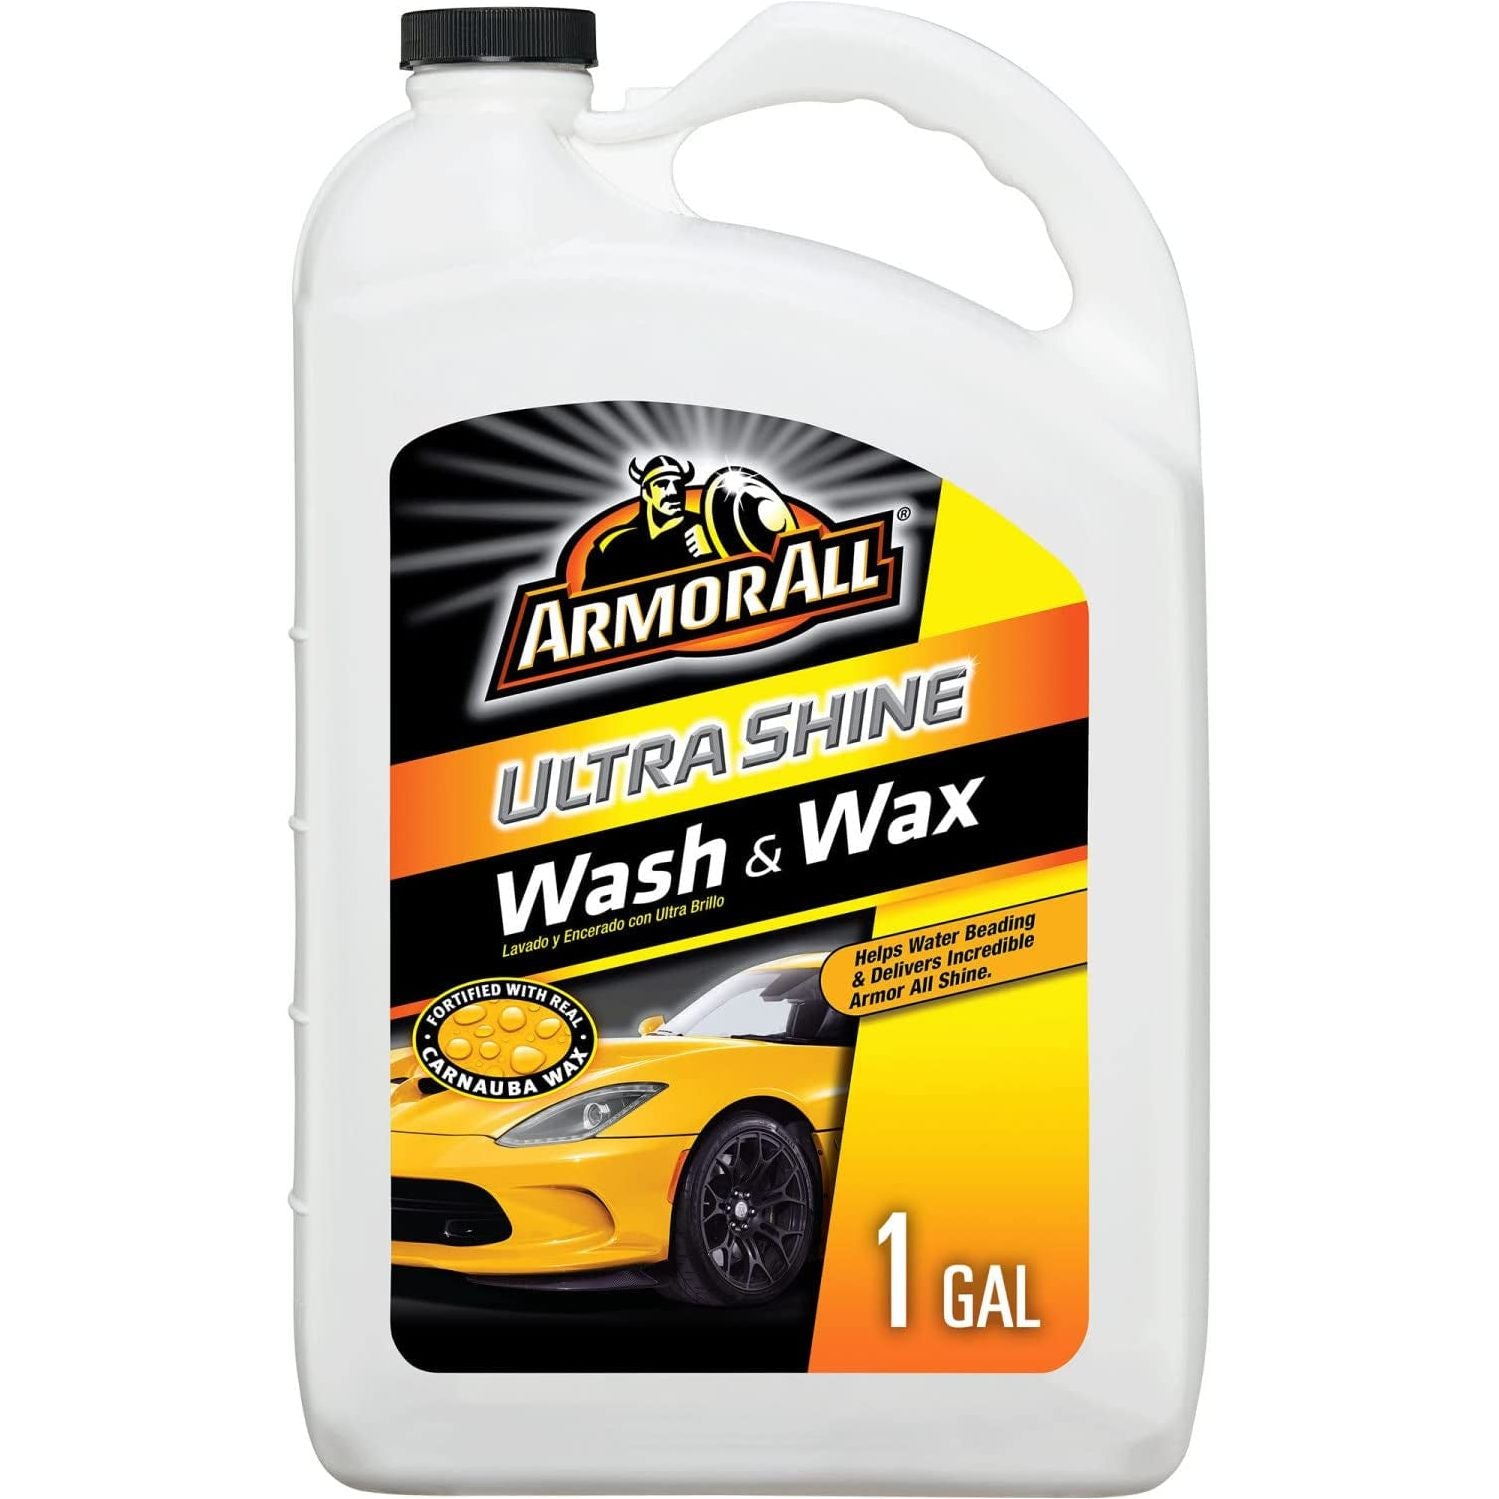 Ultra Shine Car Wash and Car Wax by , Cleaning Fluid for Cars, Trucks, Motorcycles, 1 Gal Each